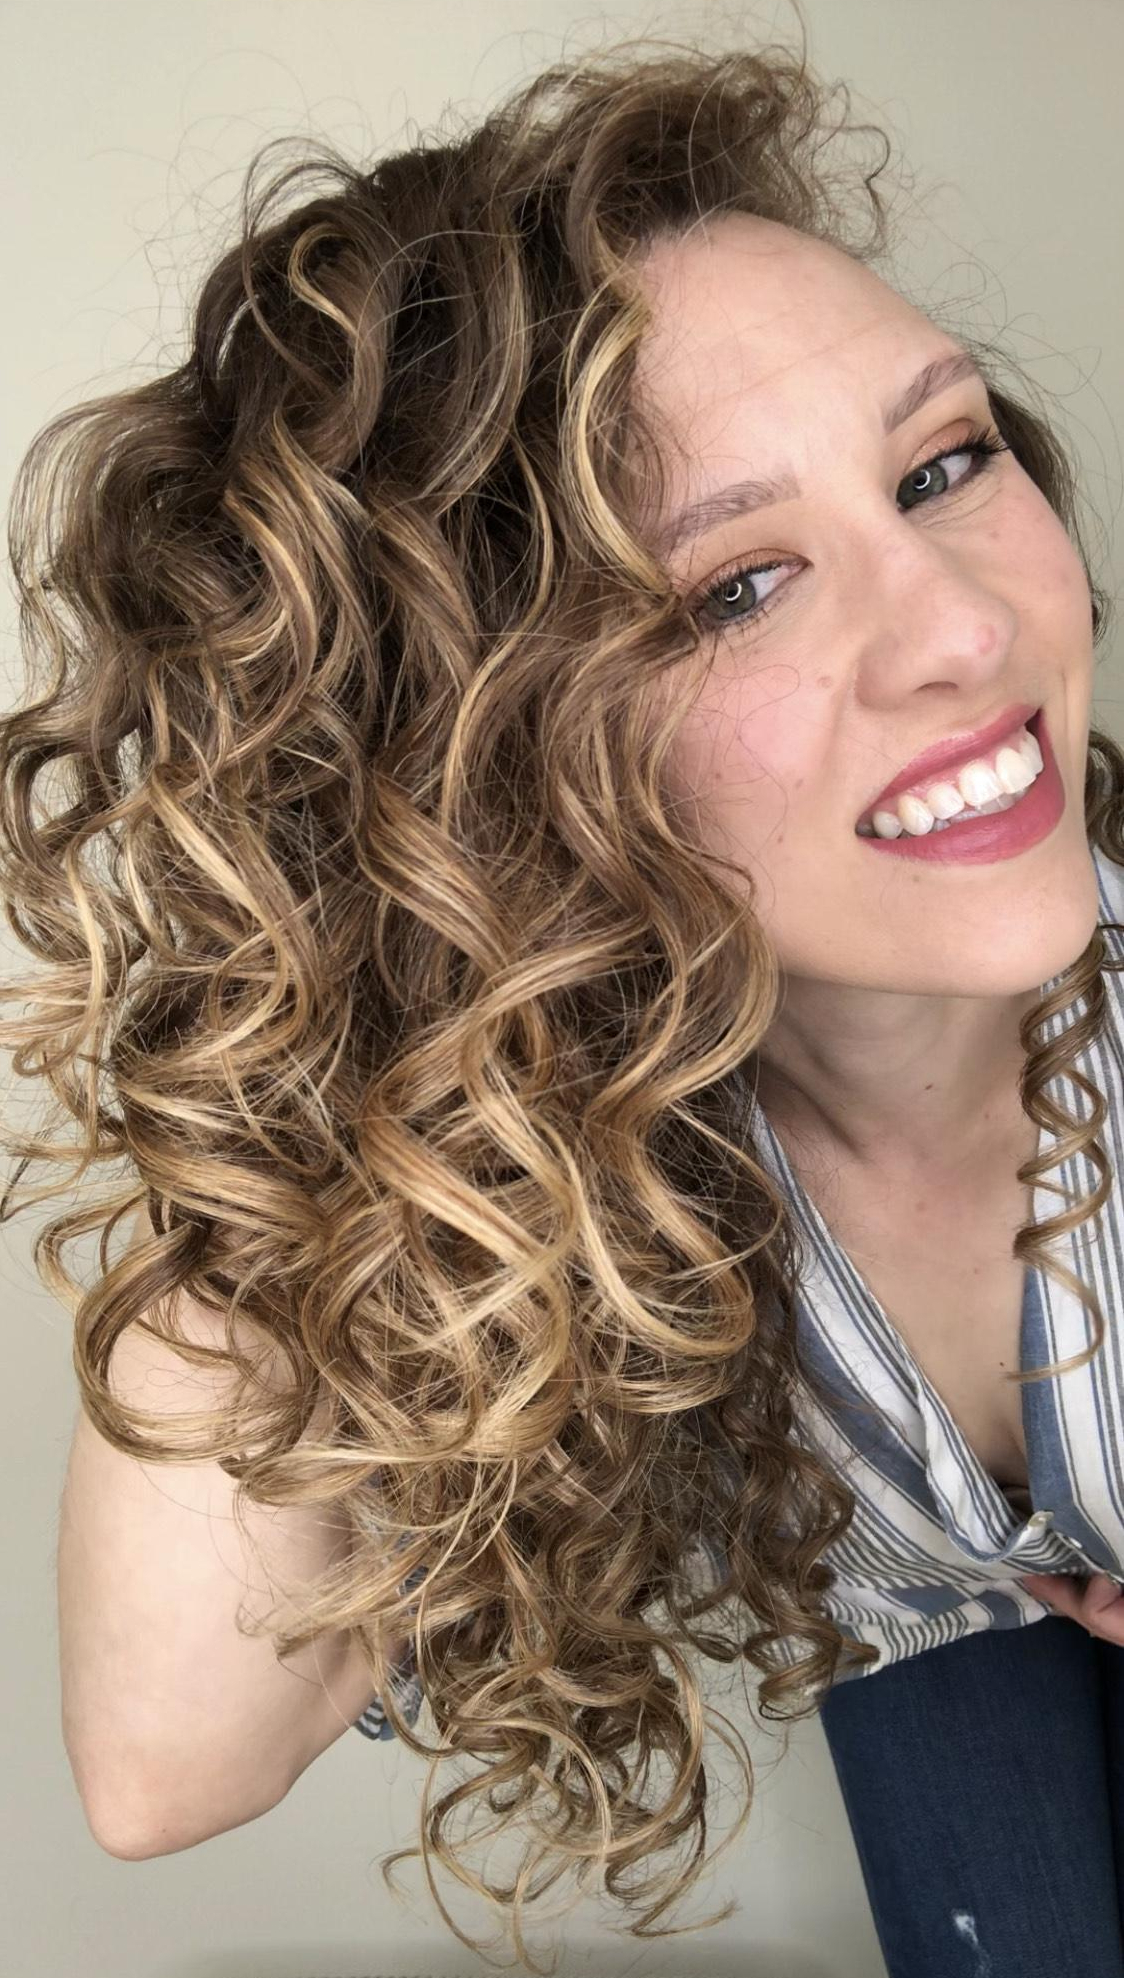 Best Oil For Curly Hair